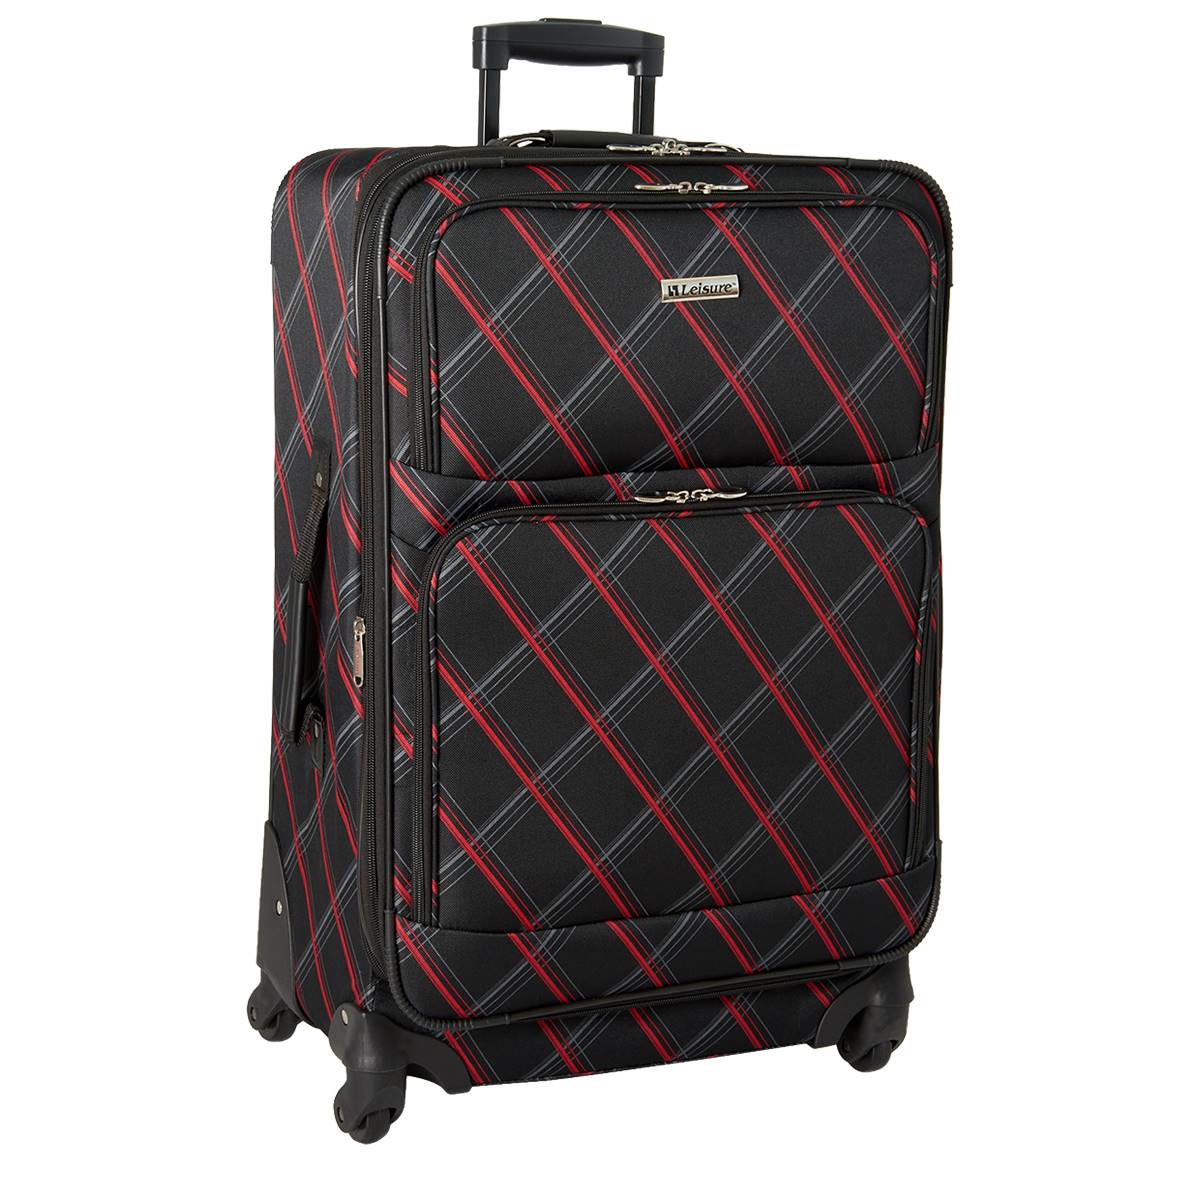 Leisure Lafayette 25in. Spinner Luggage - Black/Red